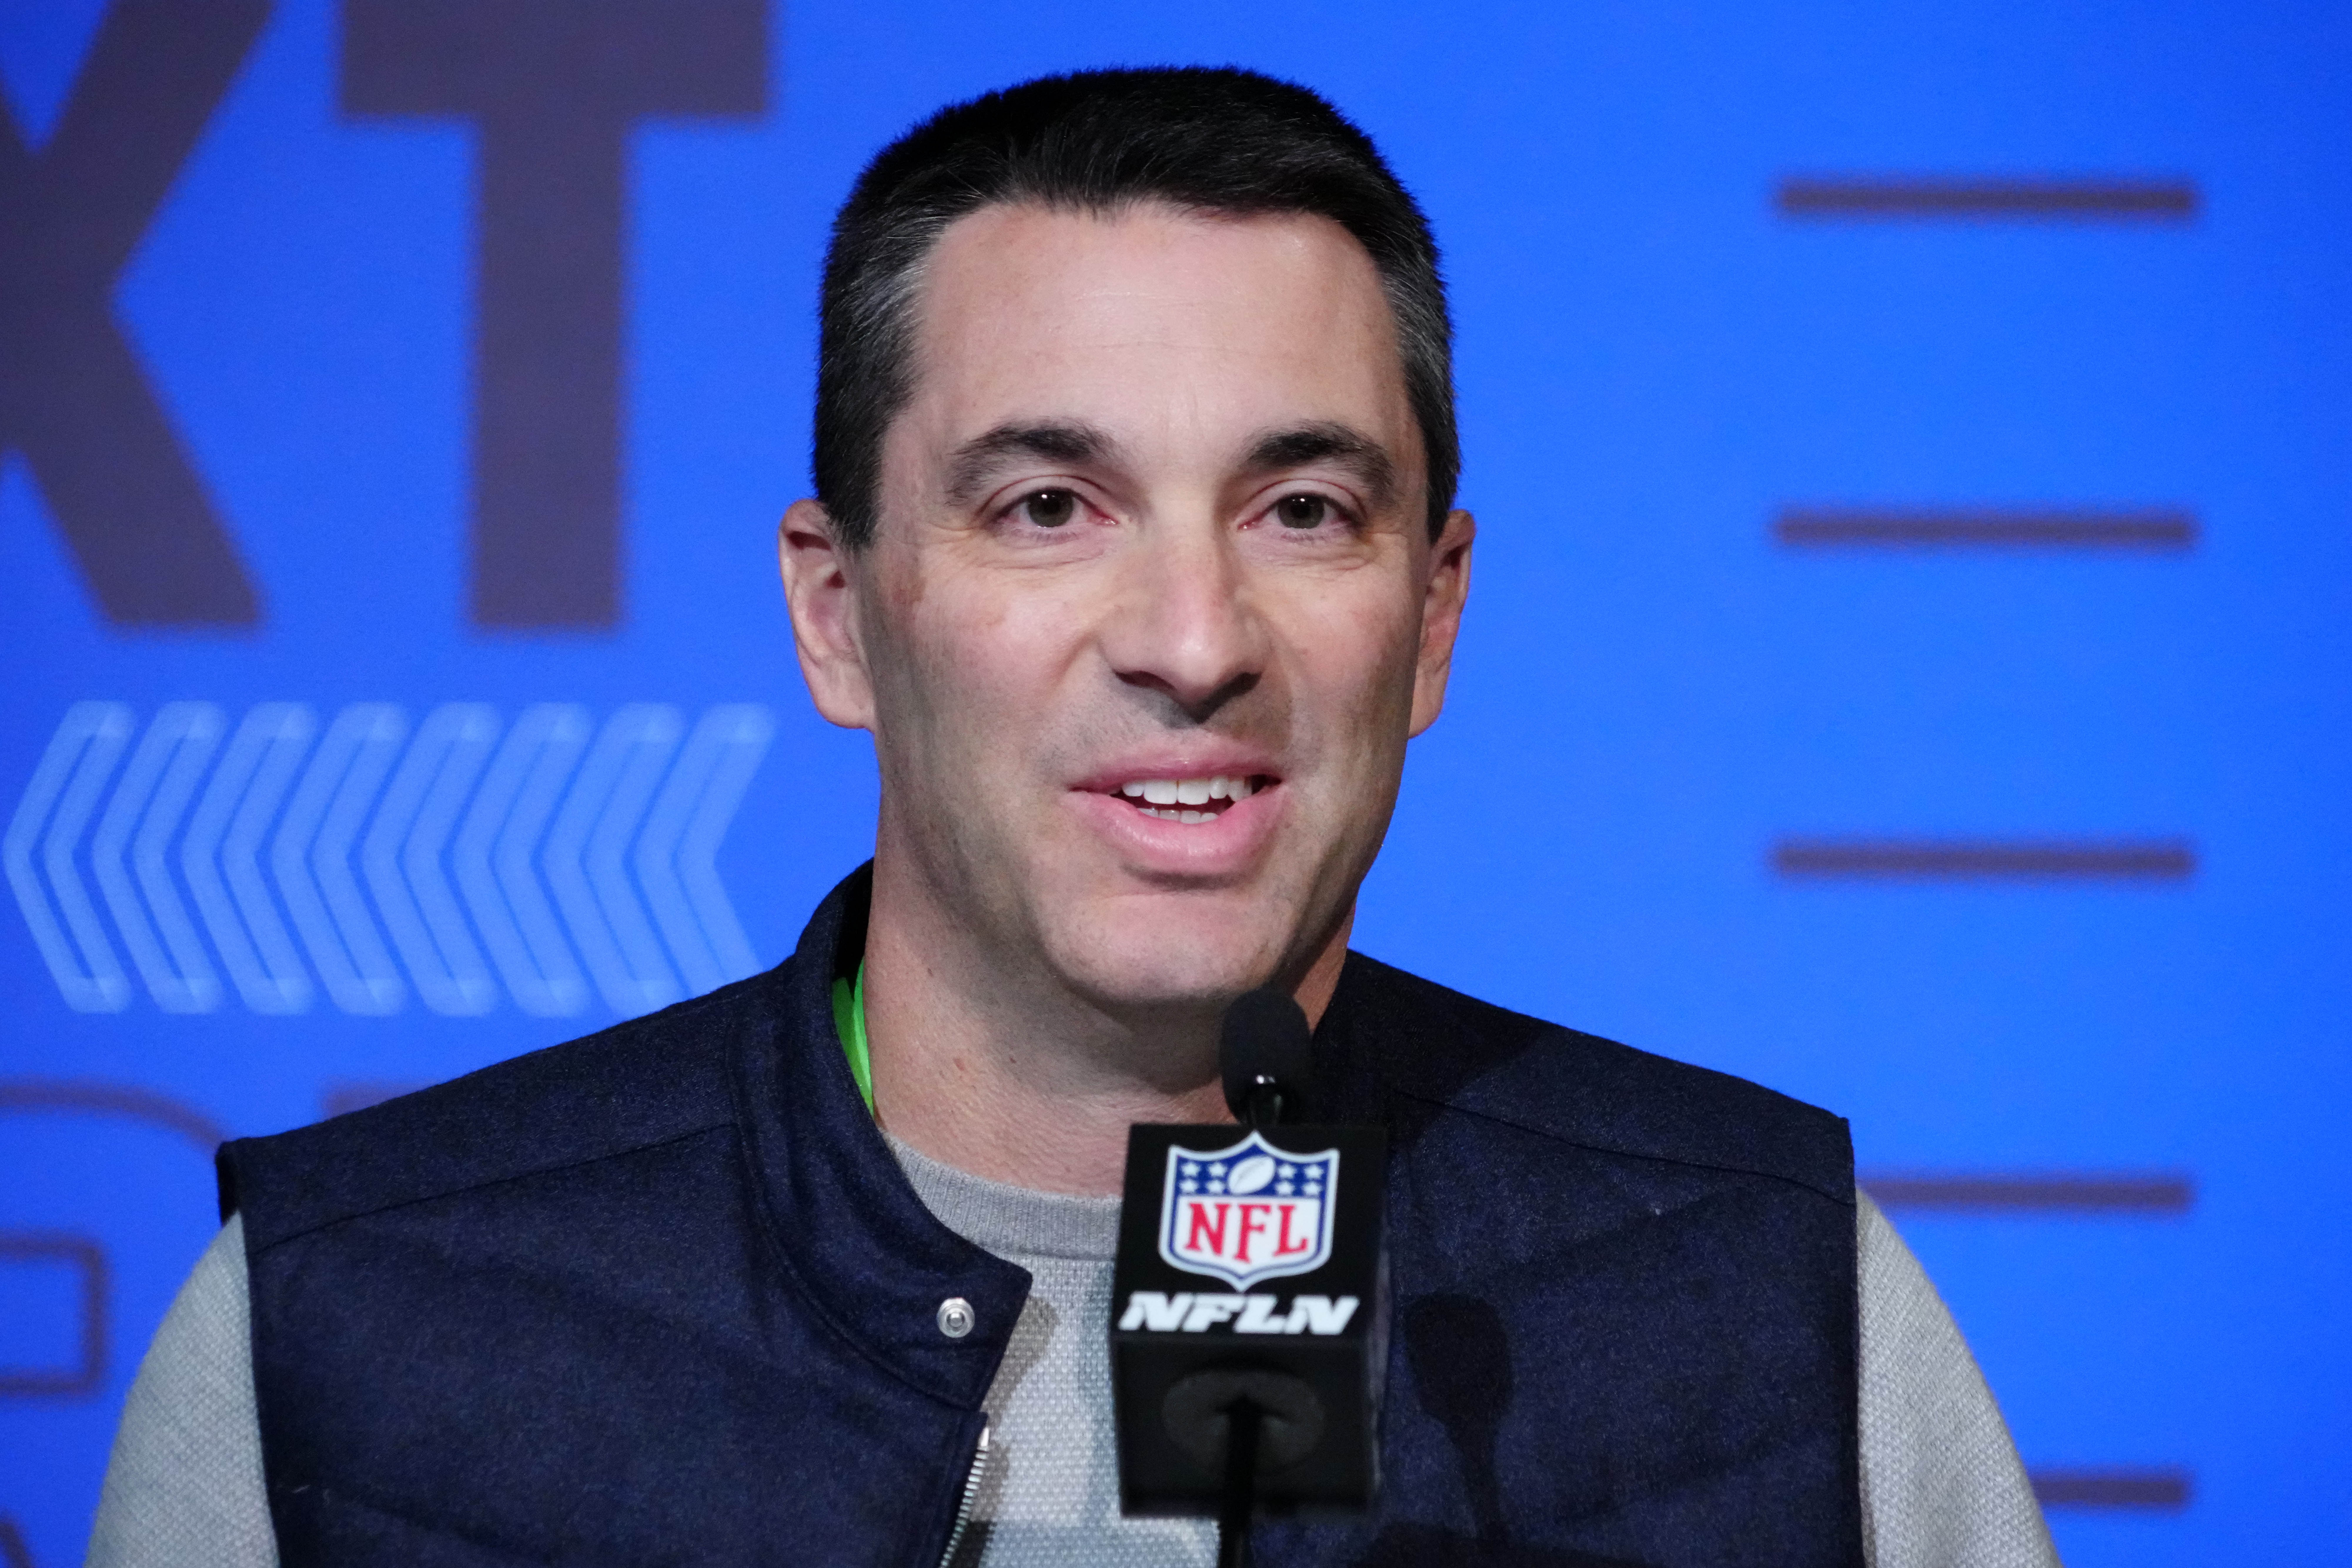 Mar 1, 2022; Indianapolis, IN, USA; Los Angeles Chargers general manager Tom Telesco during the NFL Combine at the Indiana Convention Center. Mandatory Credit: Kirby Lee-USA TODAY Sports